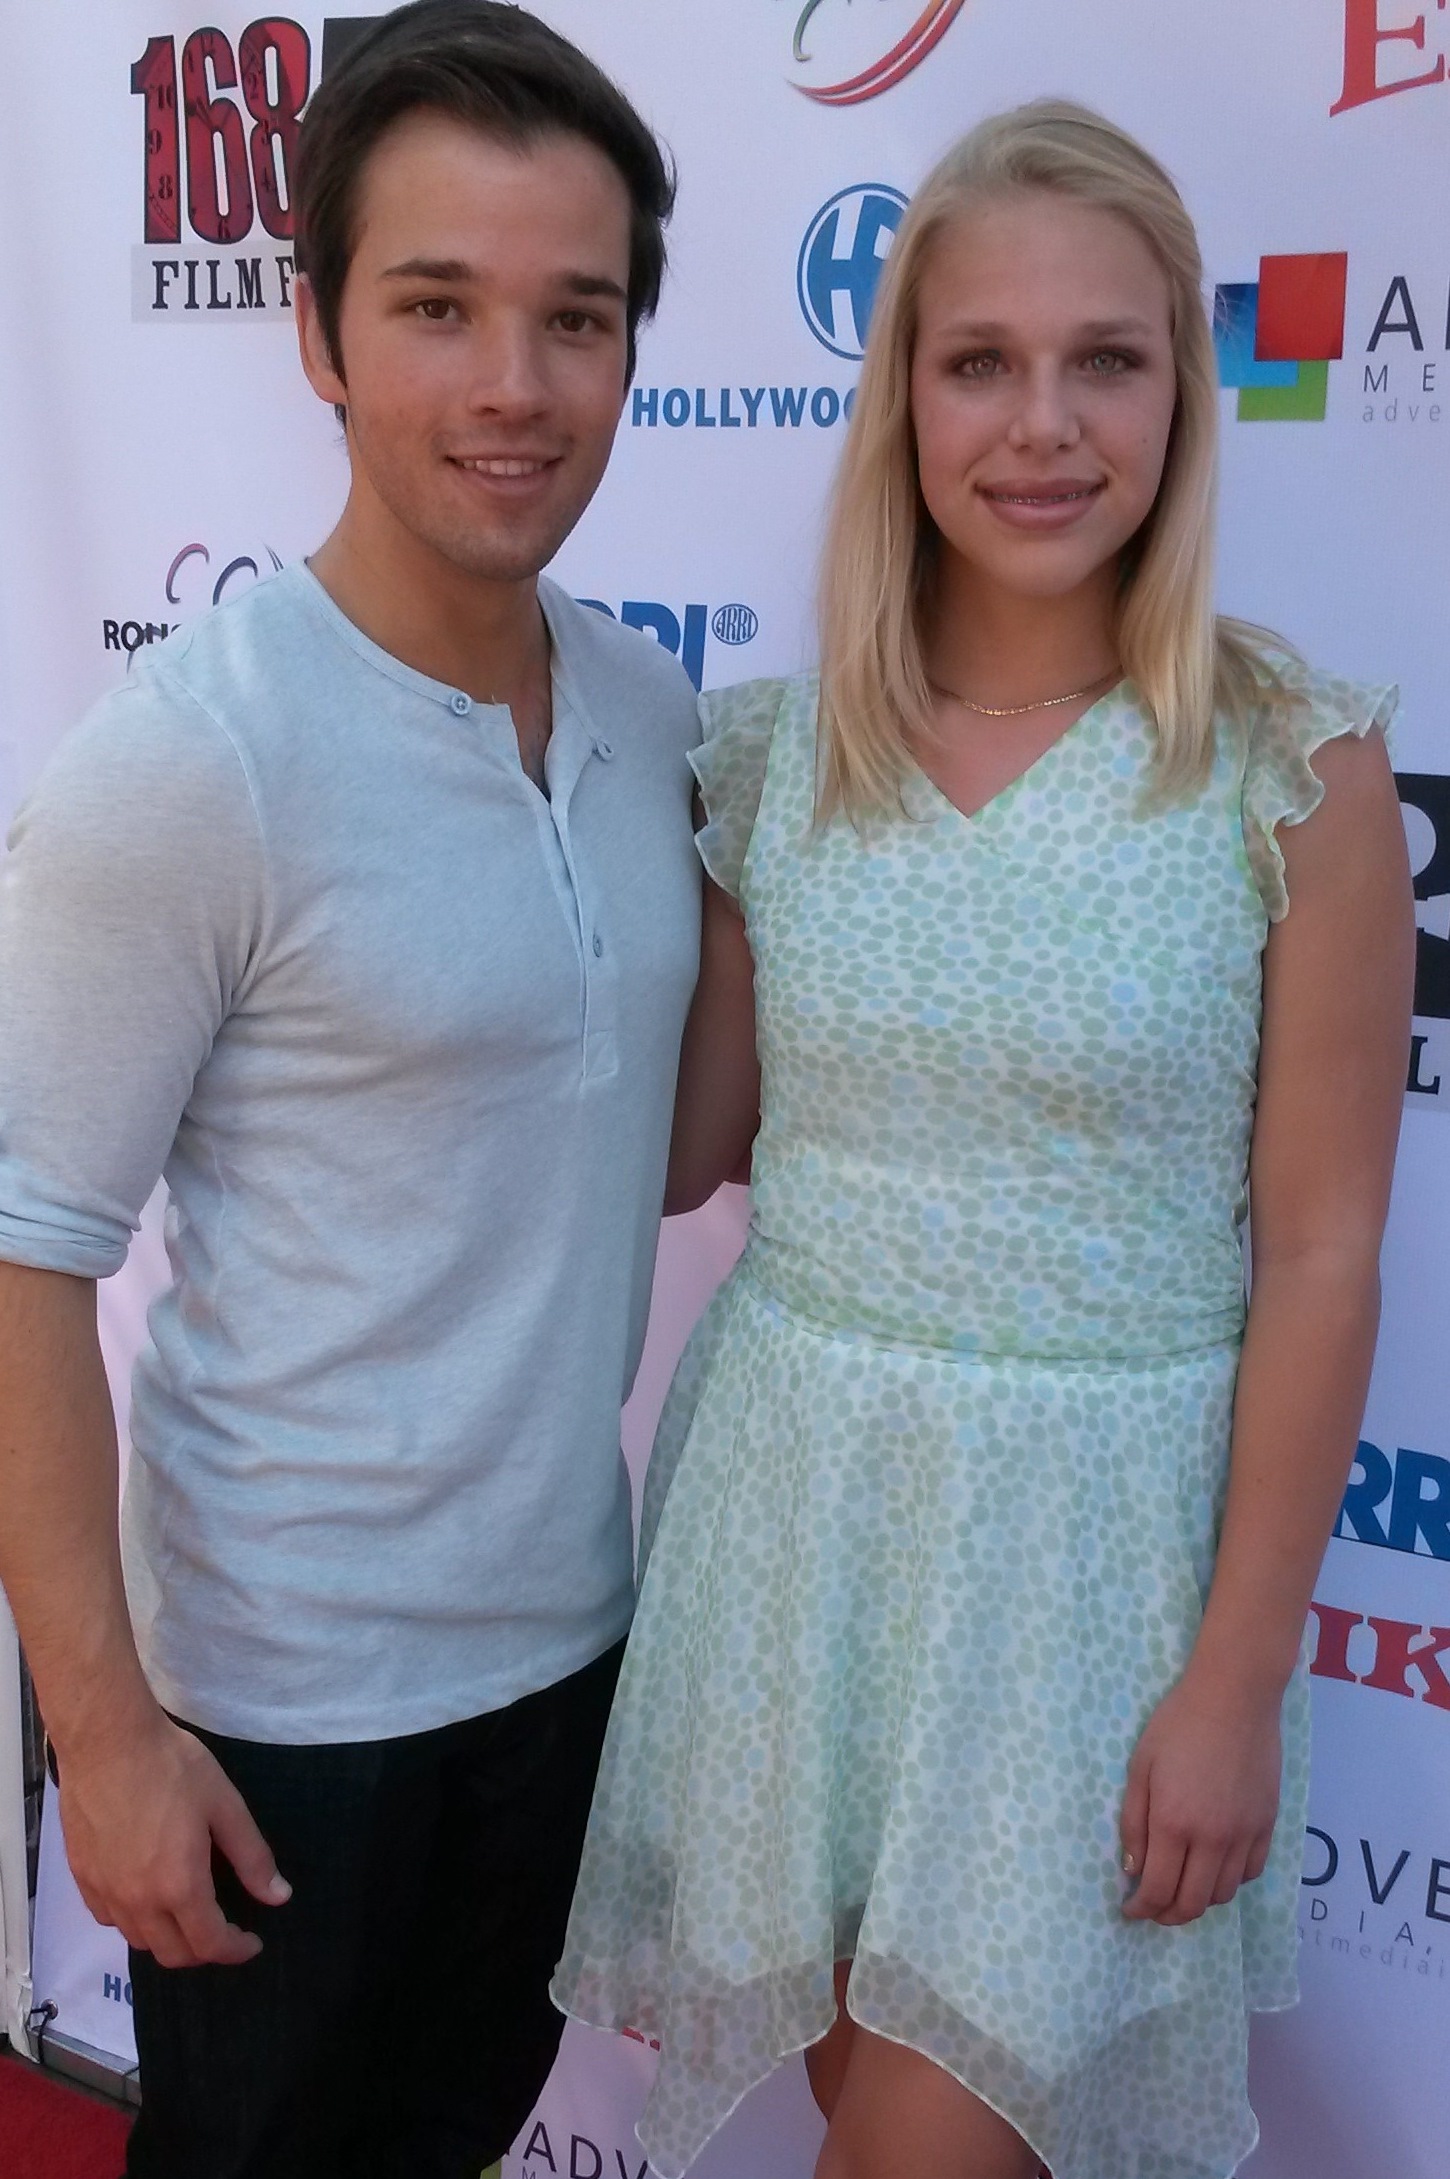 Nathan Kress with Kaila at the 168 Film Festival, 